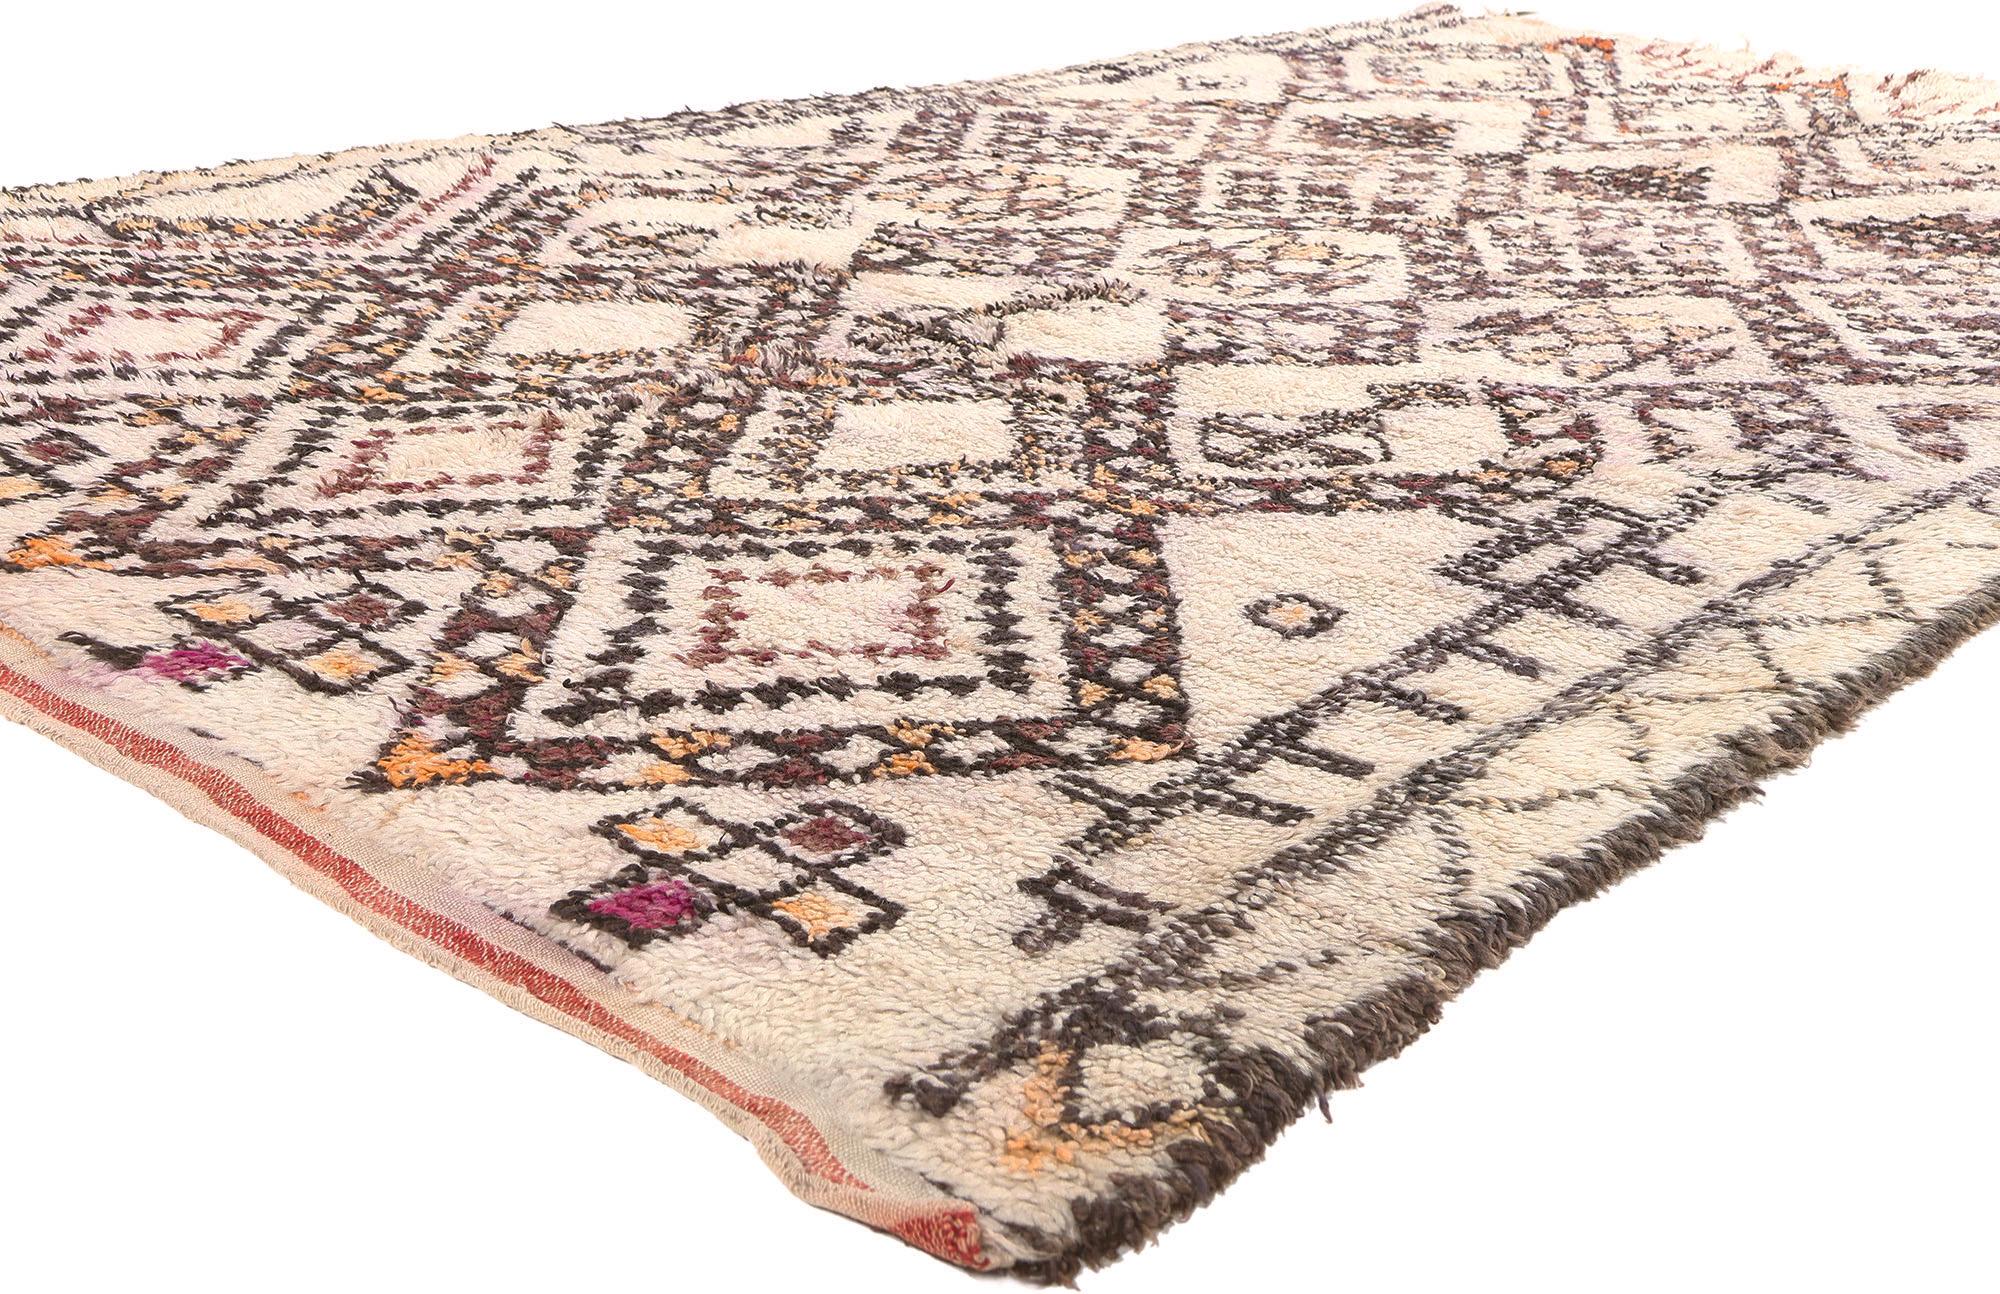 20858 Vintage Moroccan Beni Ourain Rug, 05'09 x 09'05.
This vintage Moroccan rug hails from the Beni Ourain tribe, an integral part of the broader Berber ethnic group in Morocco. Meticulously crafted from natural, undyed sheep's wool, these rugs are